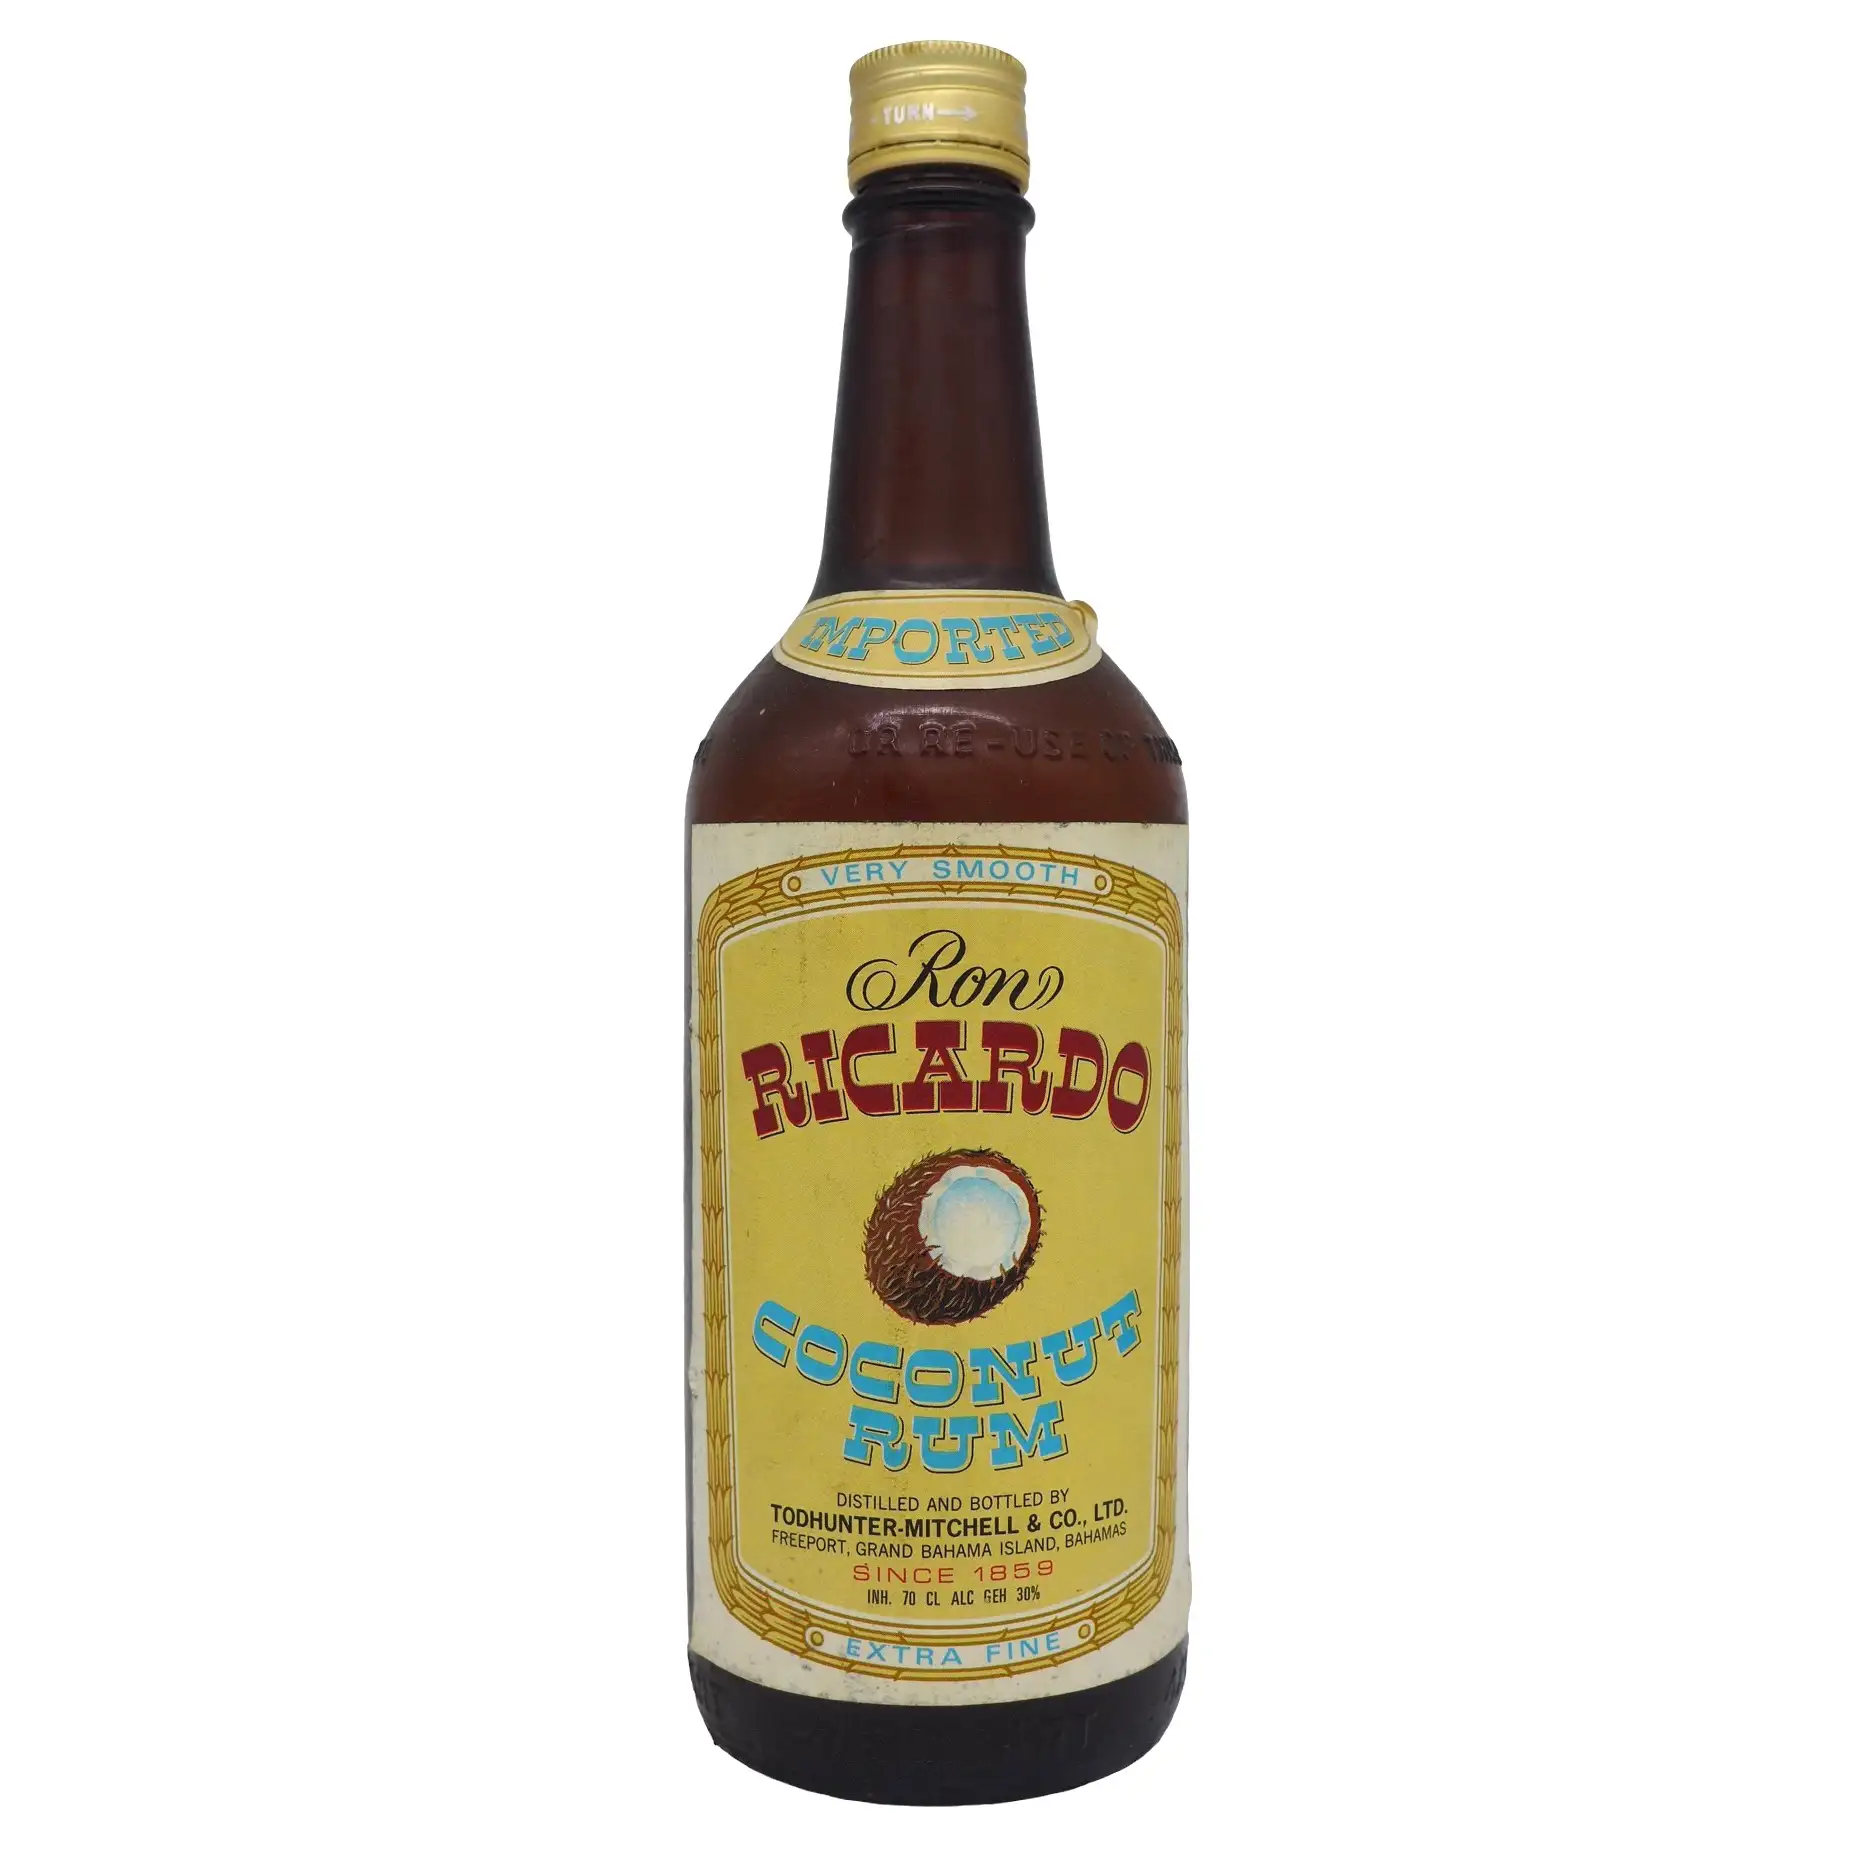 Image of the front of the bottle of the rum Ricardo Coconut Rum